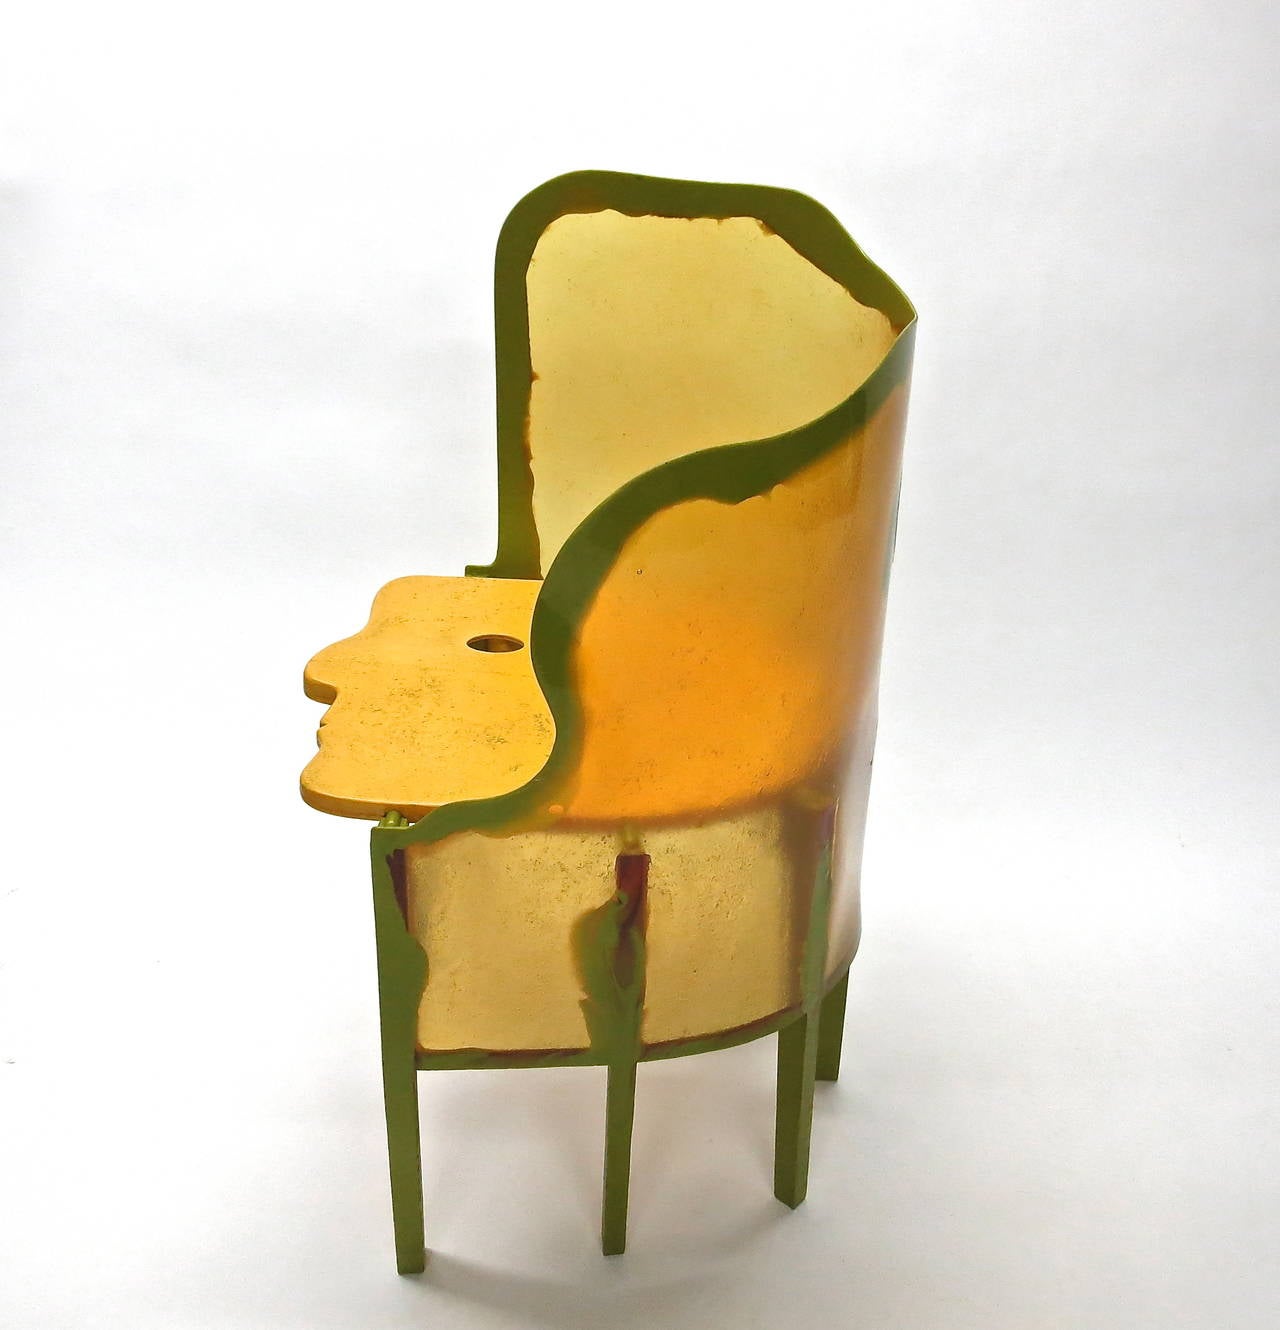 Late 20th Century Open Sky Crosby Chair by Gaetano Pesce, NYC, 1995-1997